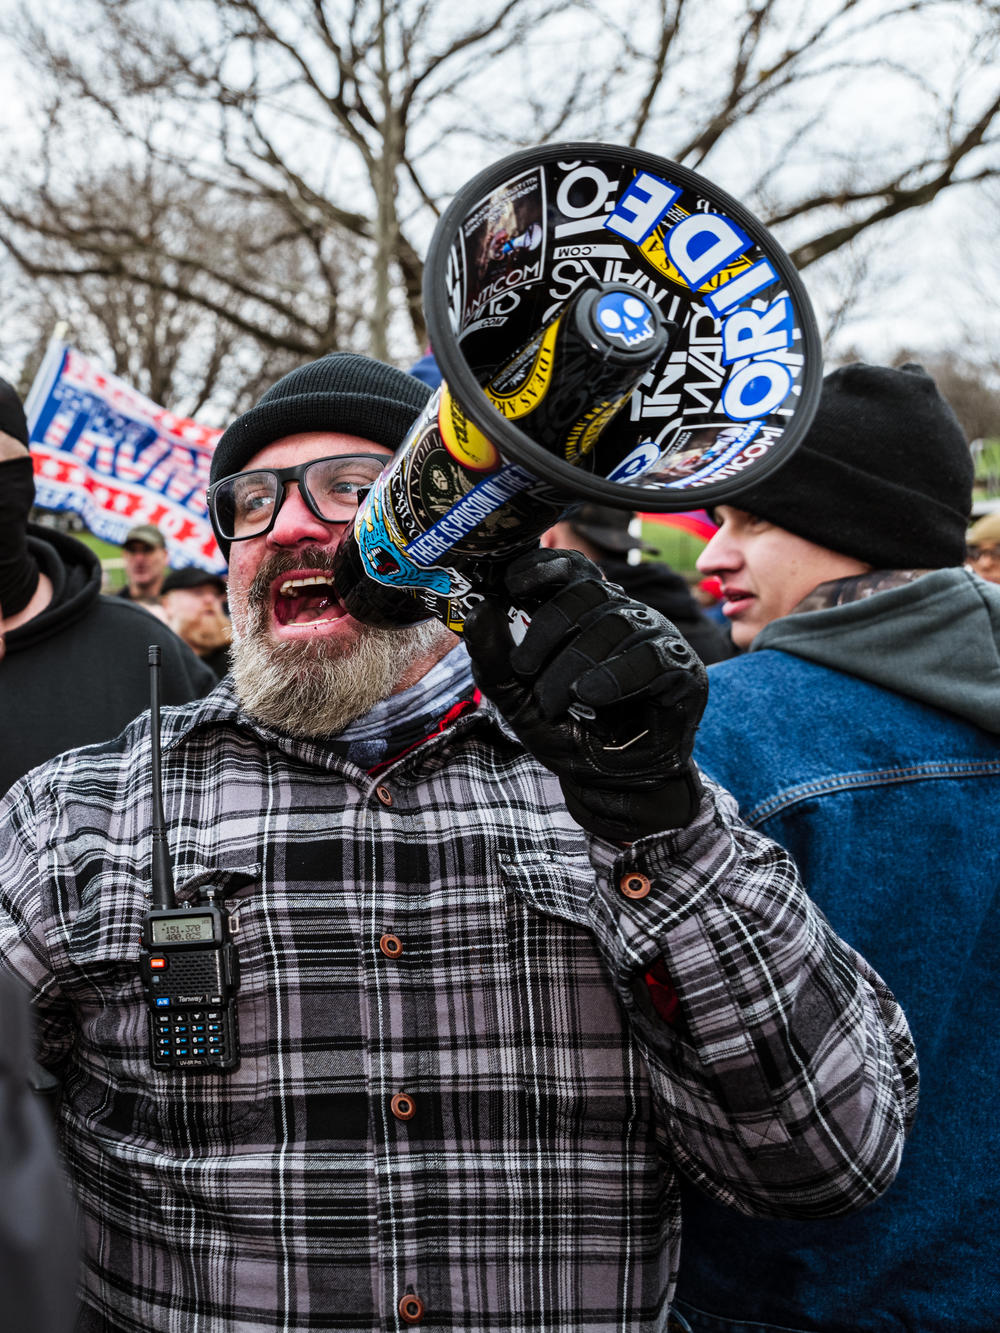 Joe Biggs, a member of the Proud Boys, speaks into a megaphone in front of the U.S. Capitol on Jan. 6. Biggs, charged in the Capitol riot, assisted in the group's growth and also has a history of violent rhetoric.